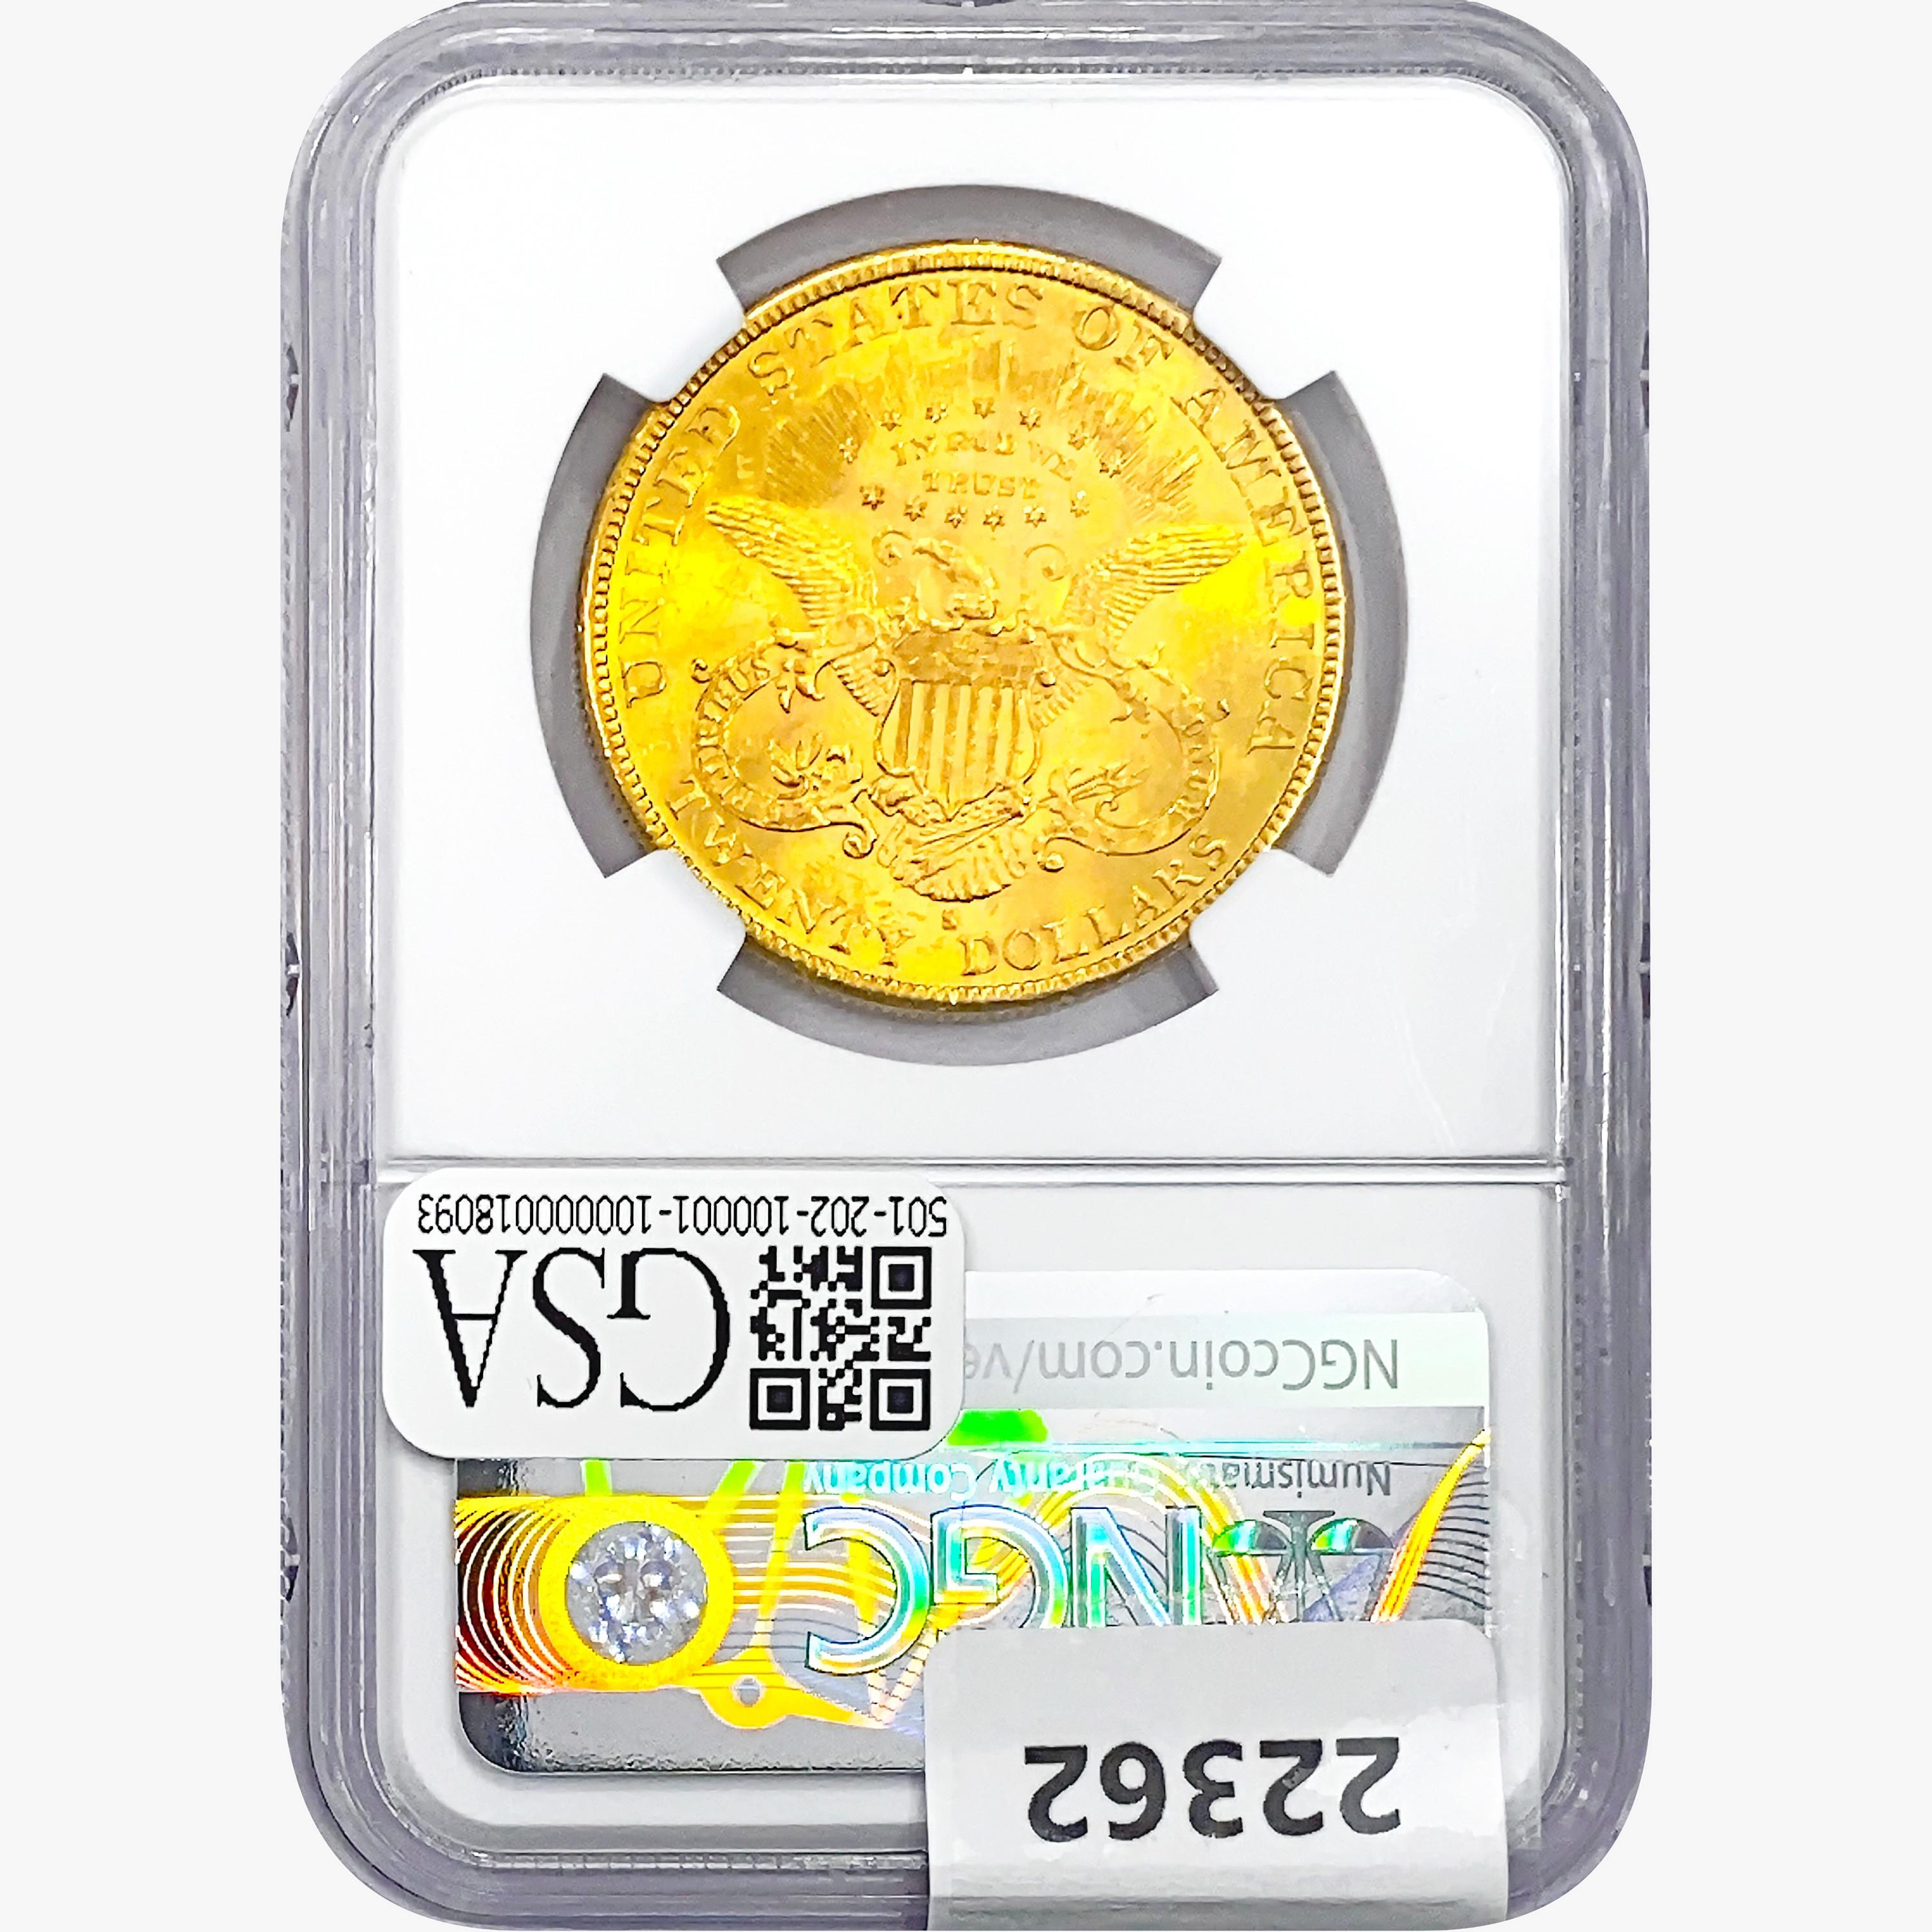 1894-S $20 Gold Double Eagle NGC MS61